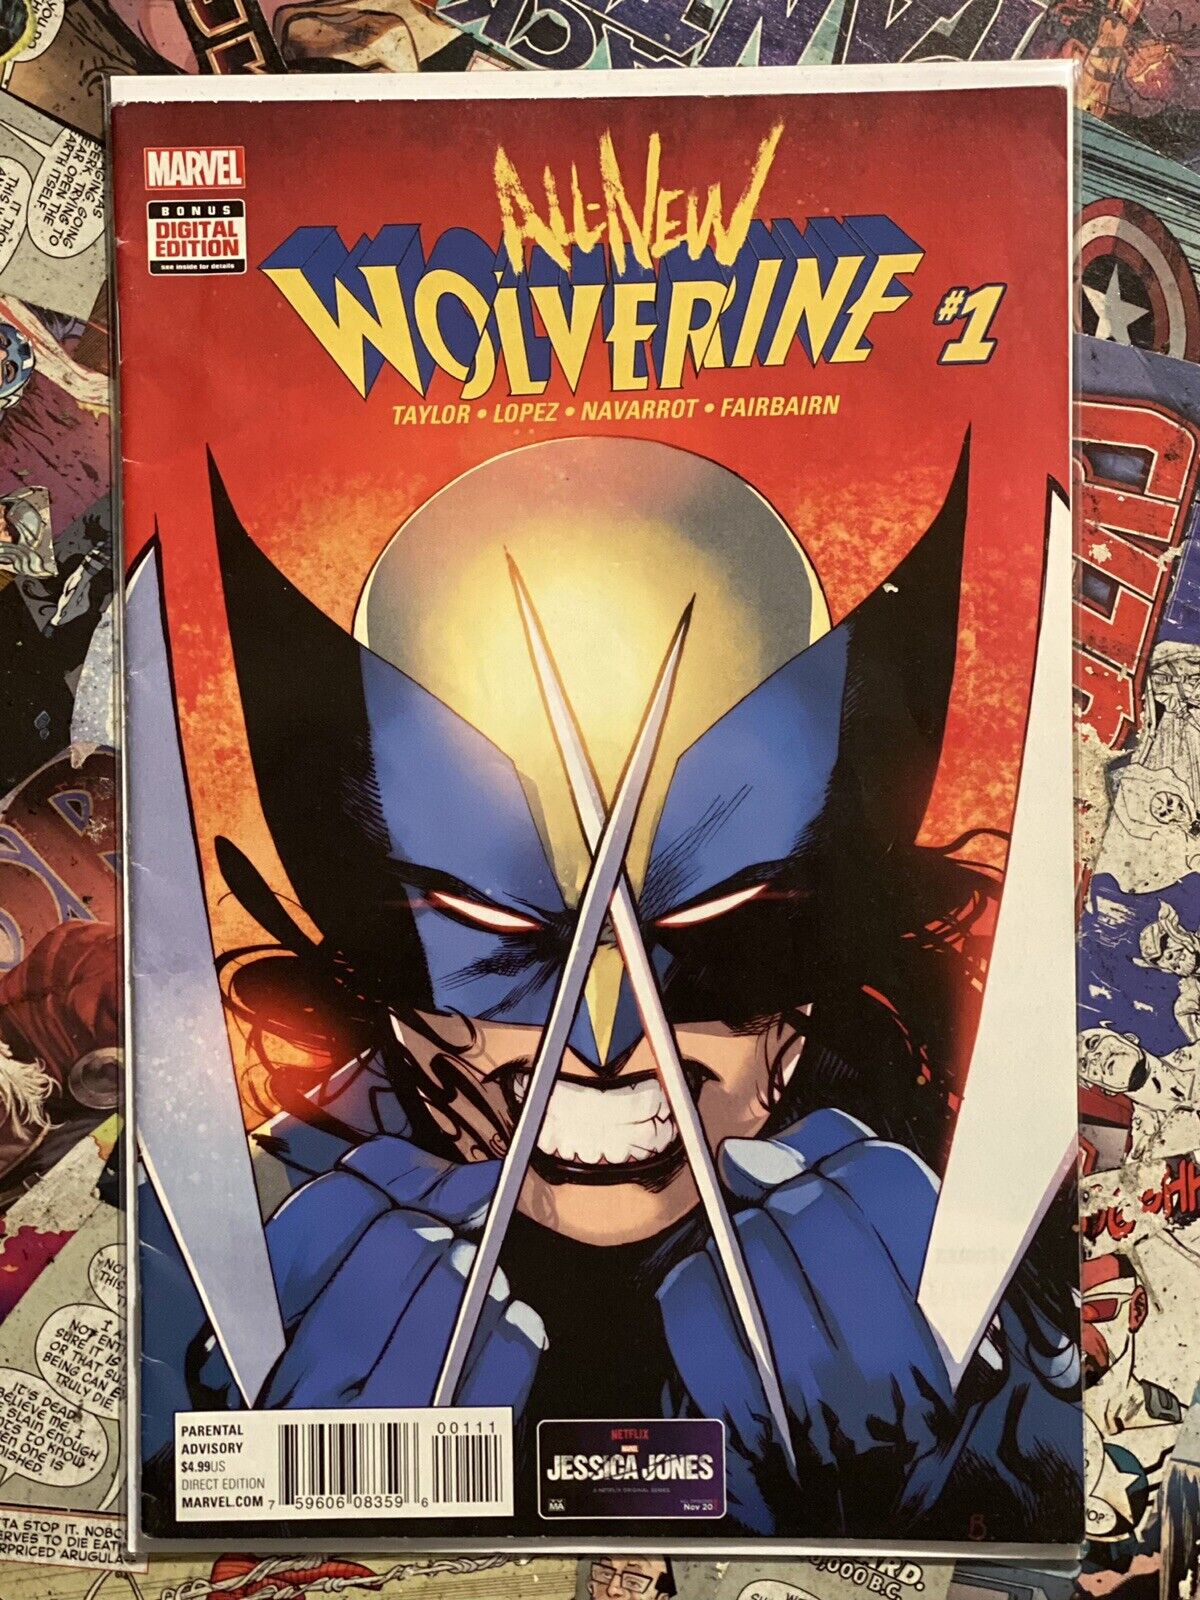 ALL-NEW WOLVERINE #1 - 1ST PRINT - 1ST X-23 as WOLVERINE - MARVEL COMICS 2016